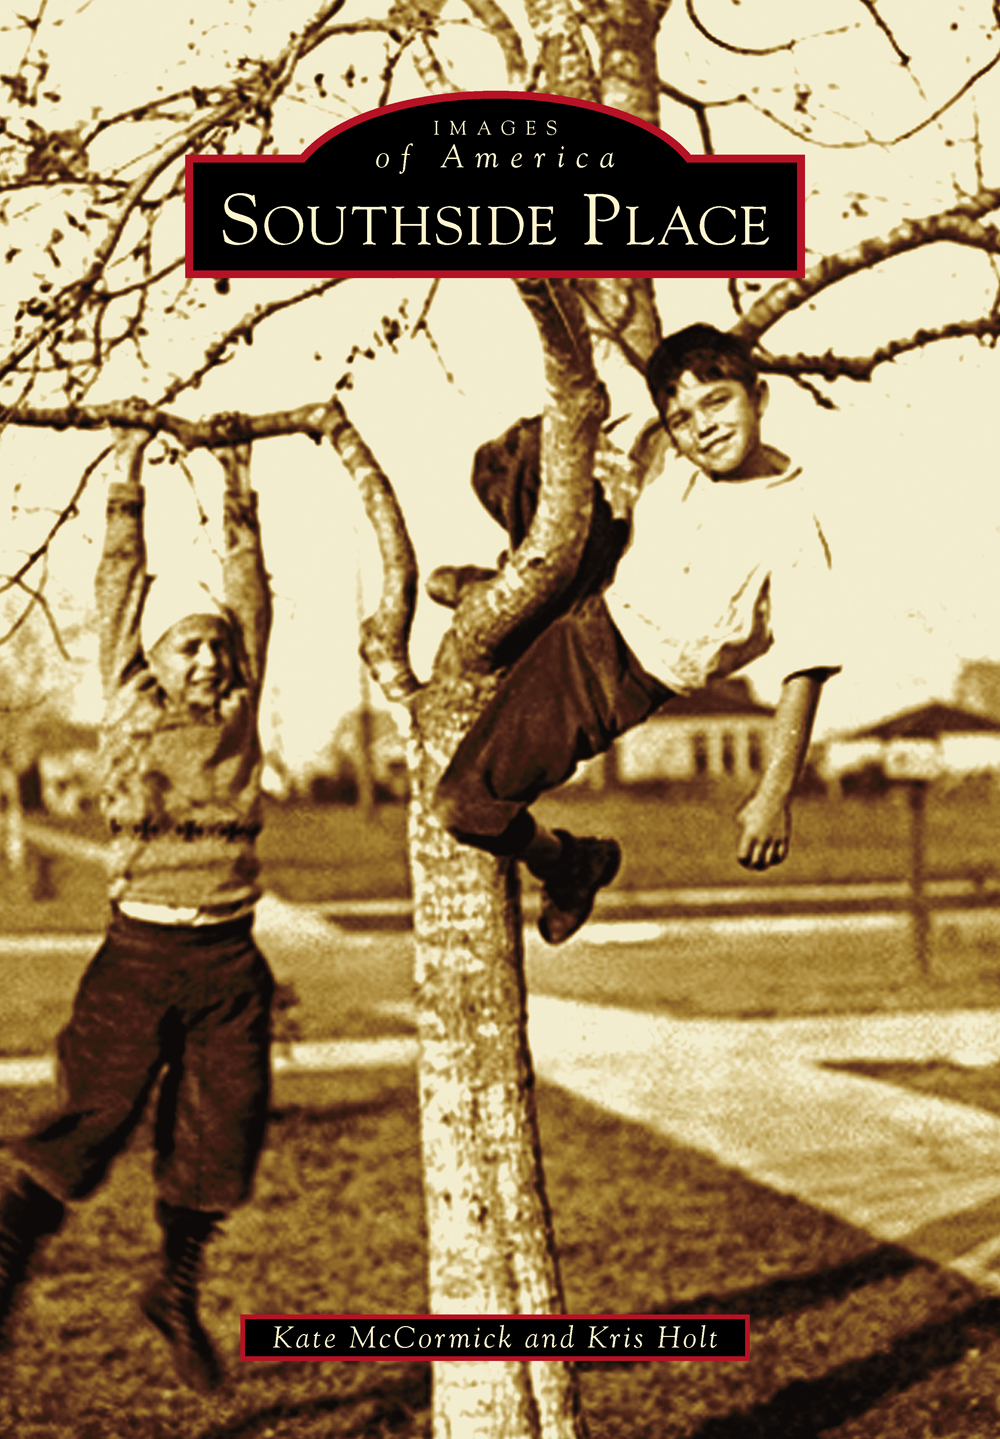 This image is the cover for the book Southside Place, Images of America